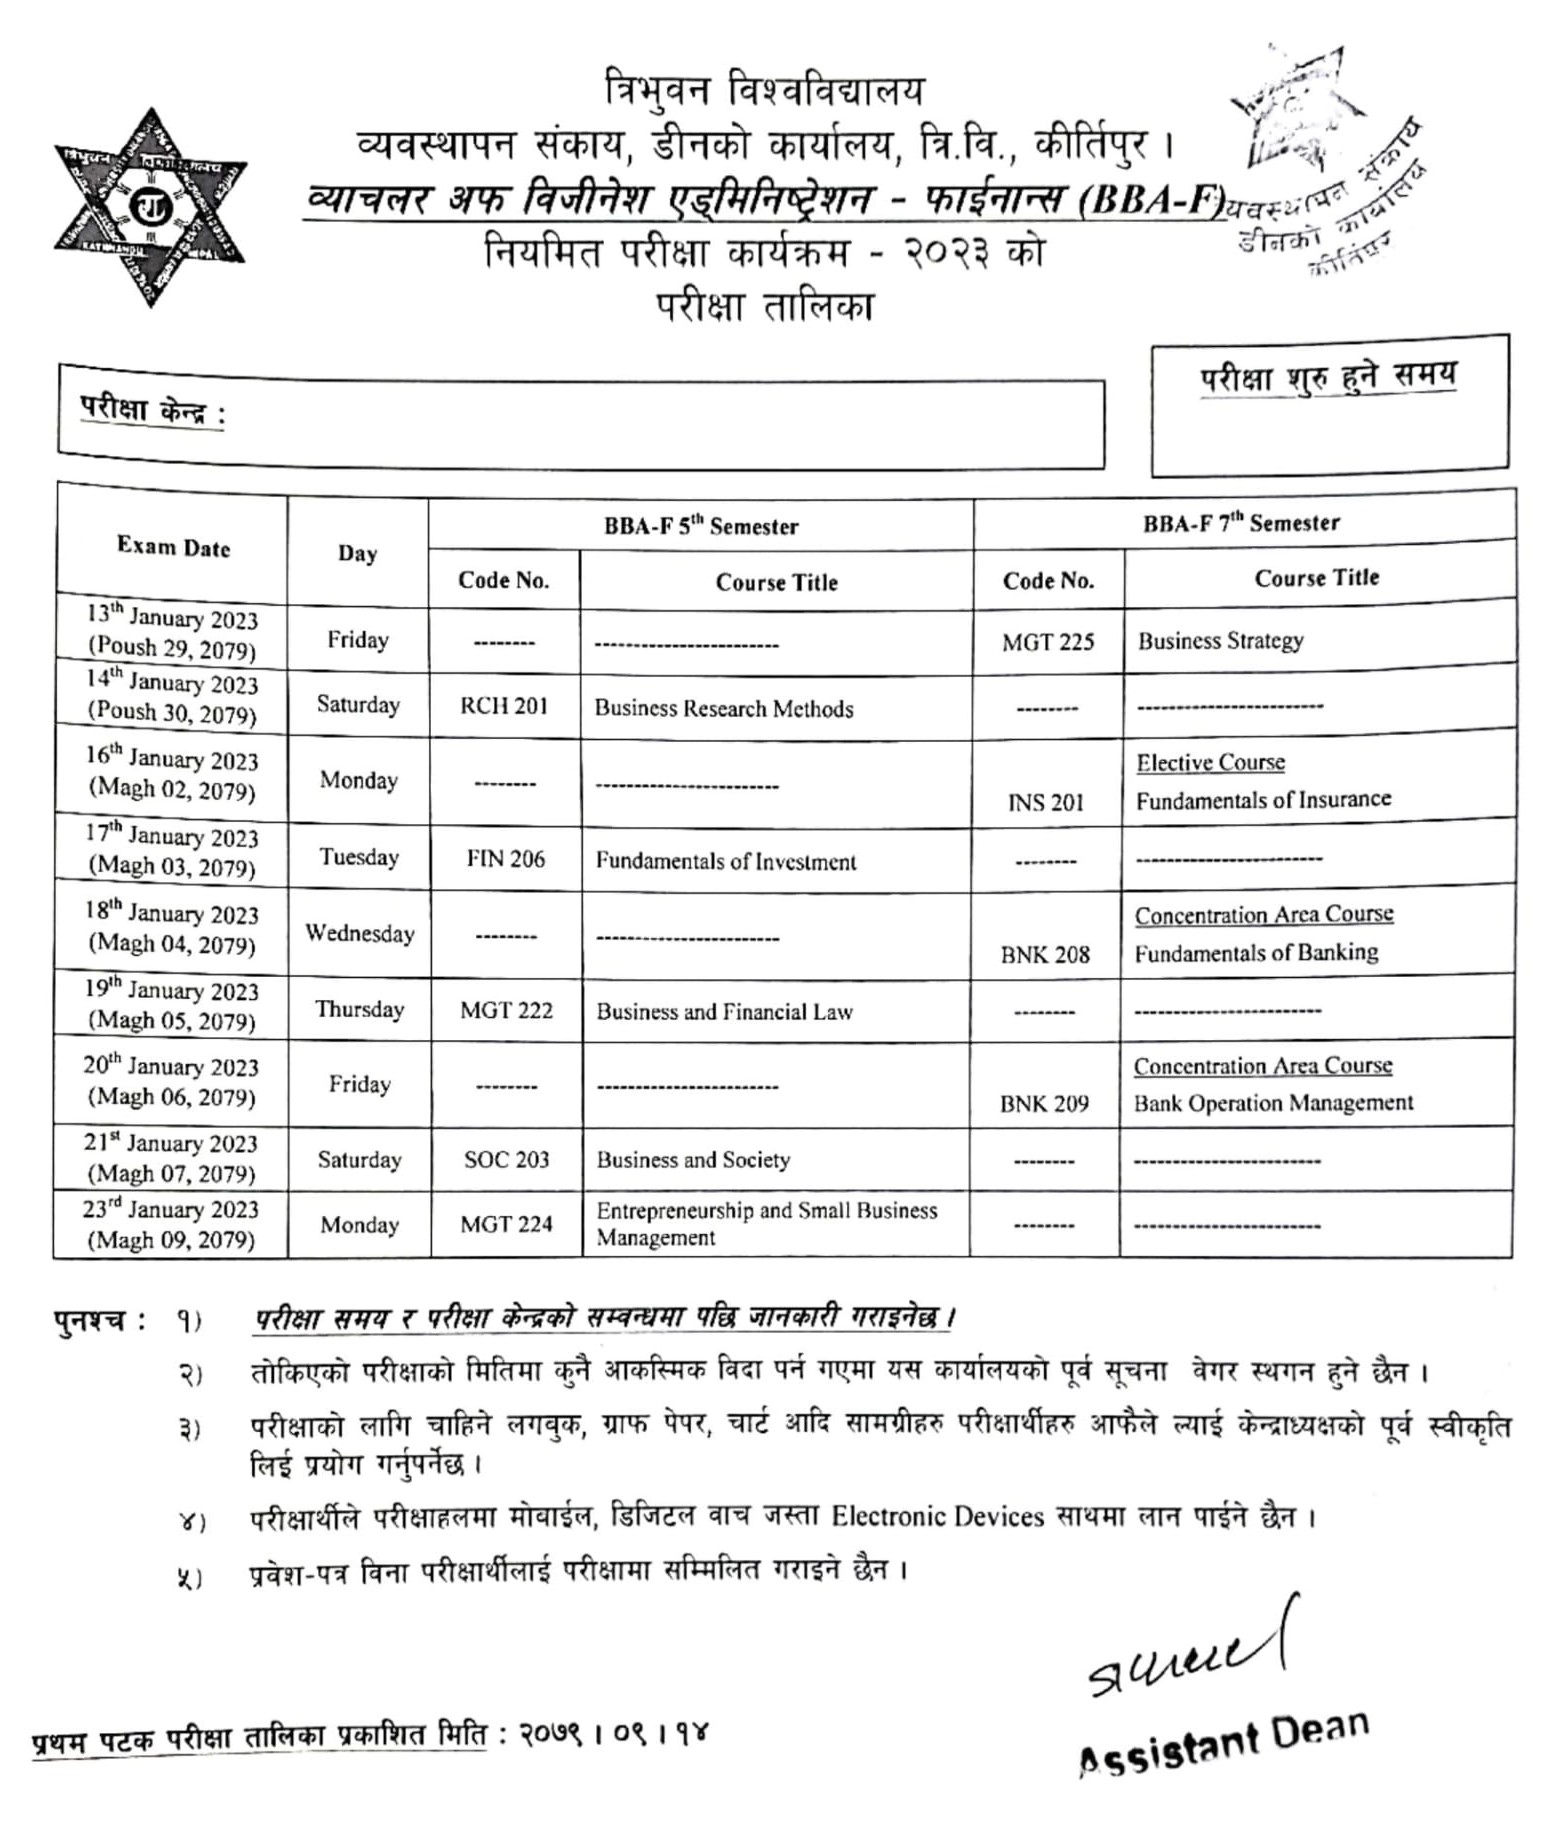 Tribhuvan University examination schedule for Bachelor of Business Administration Finance (BBA-F) 5th semester 2023